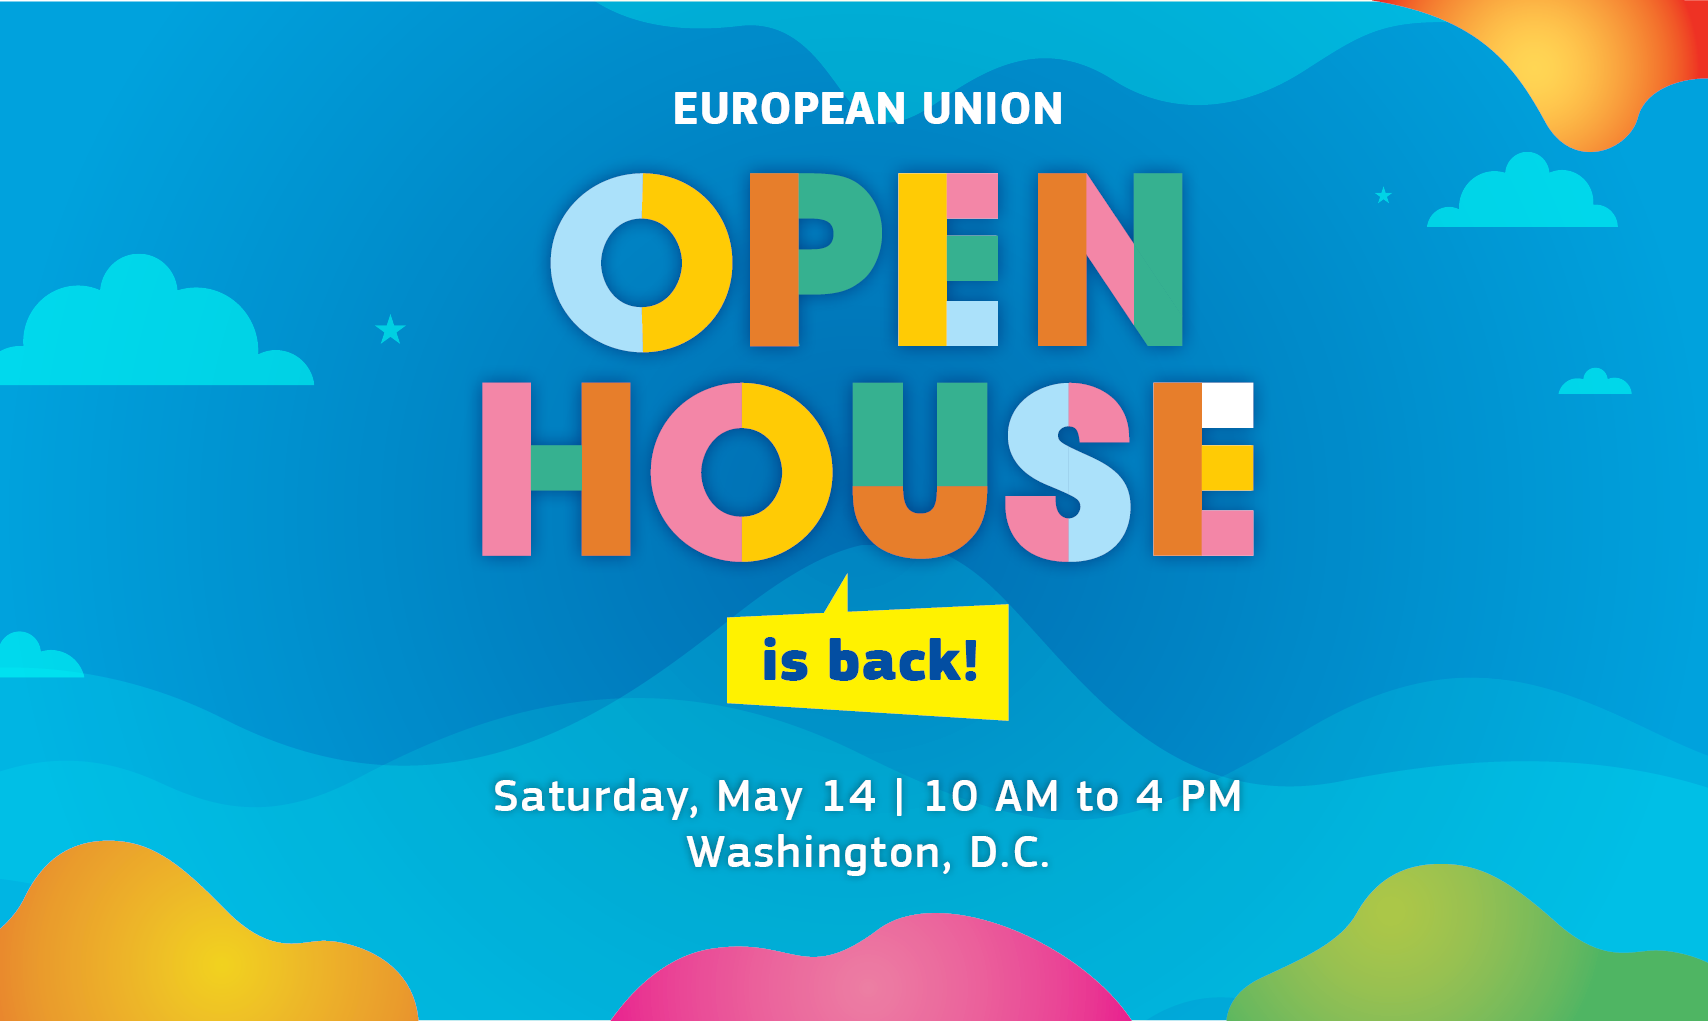 Picture of EU Open House with opening hours information: May 14 10 am to 4 pm.